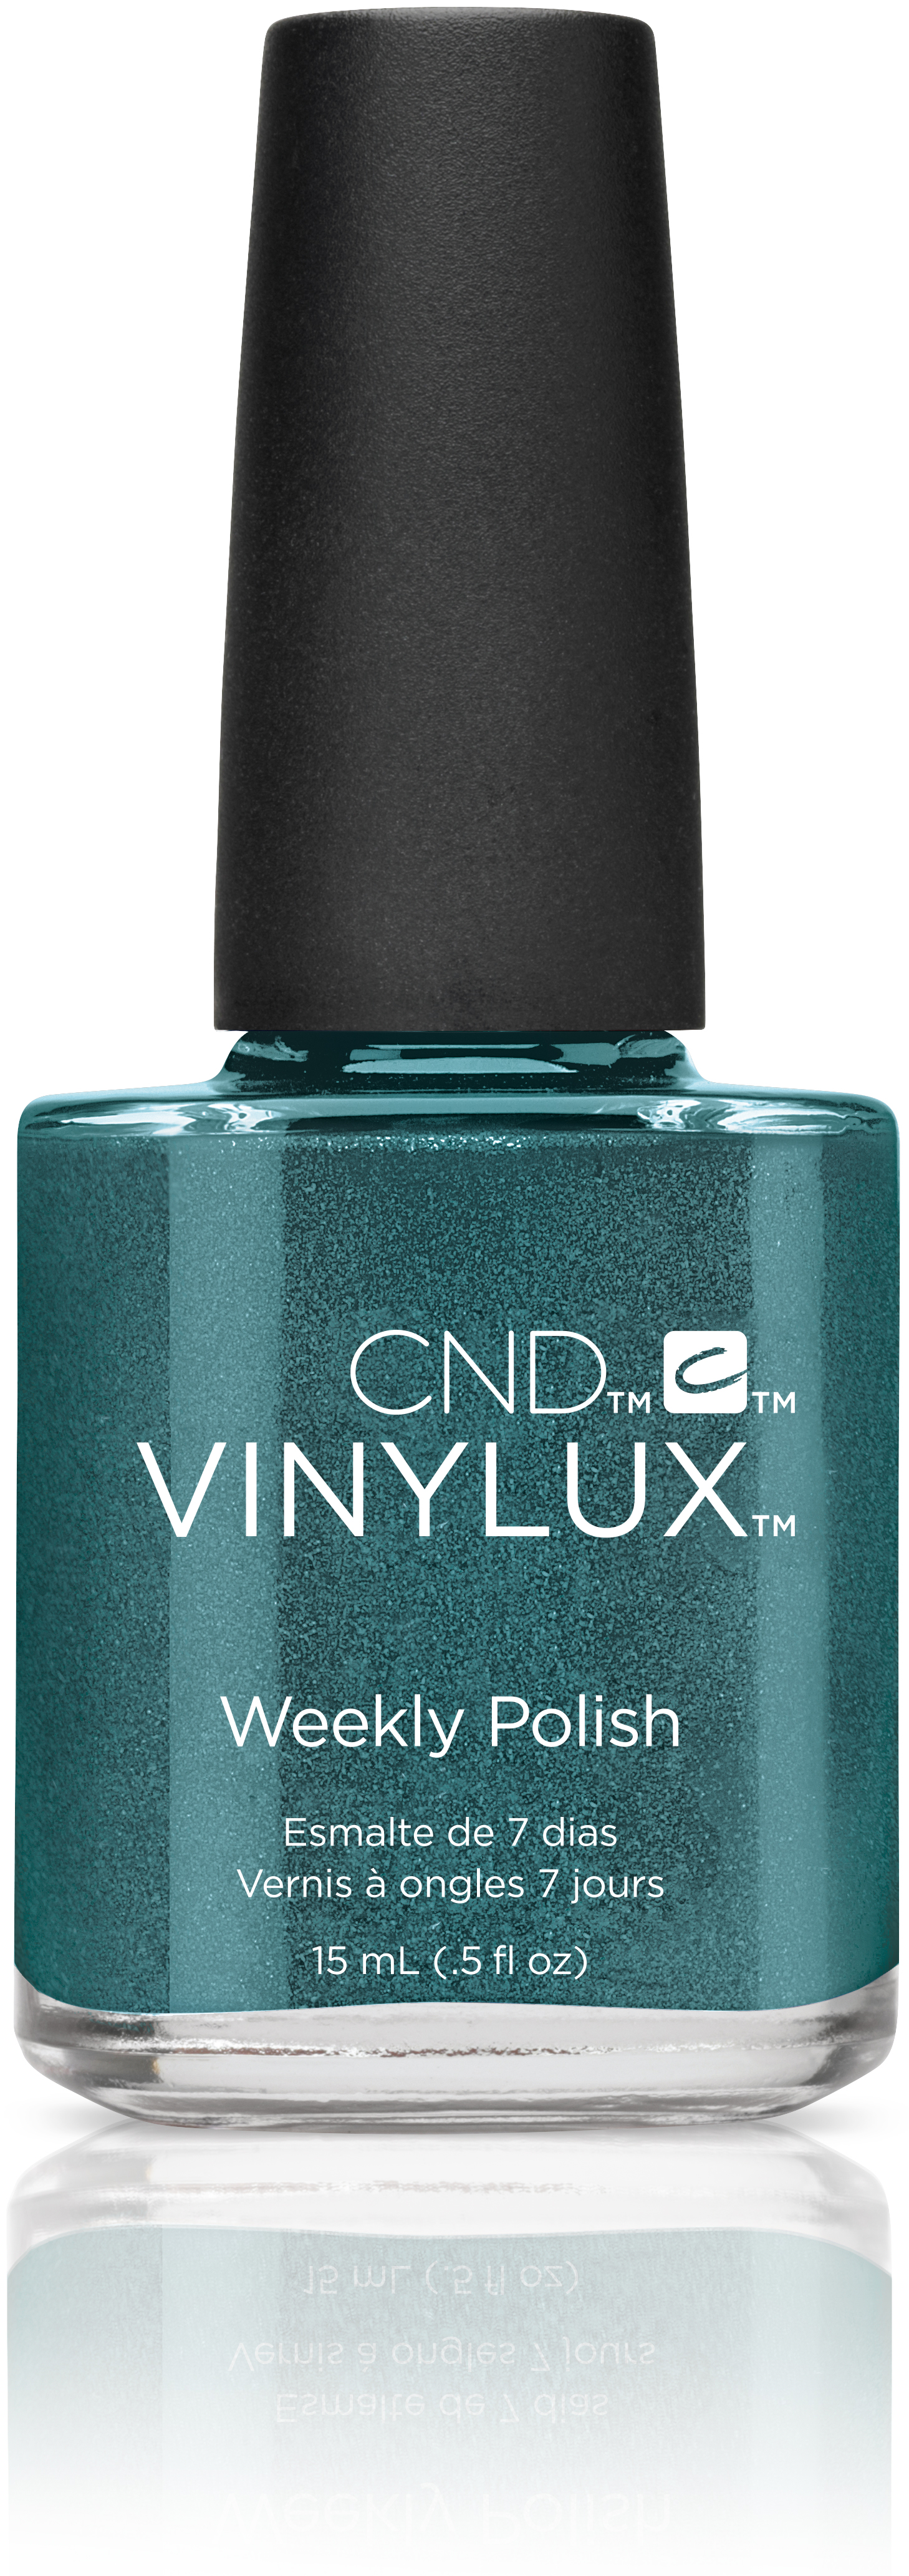 PREVIEW CND FALL COLLECTION CRAFT CULTURE The Nailscape